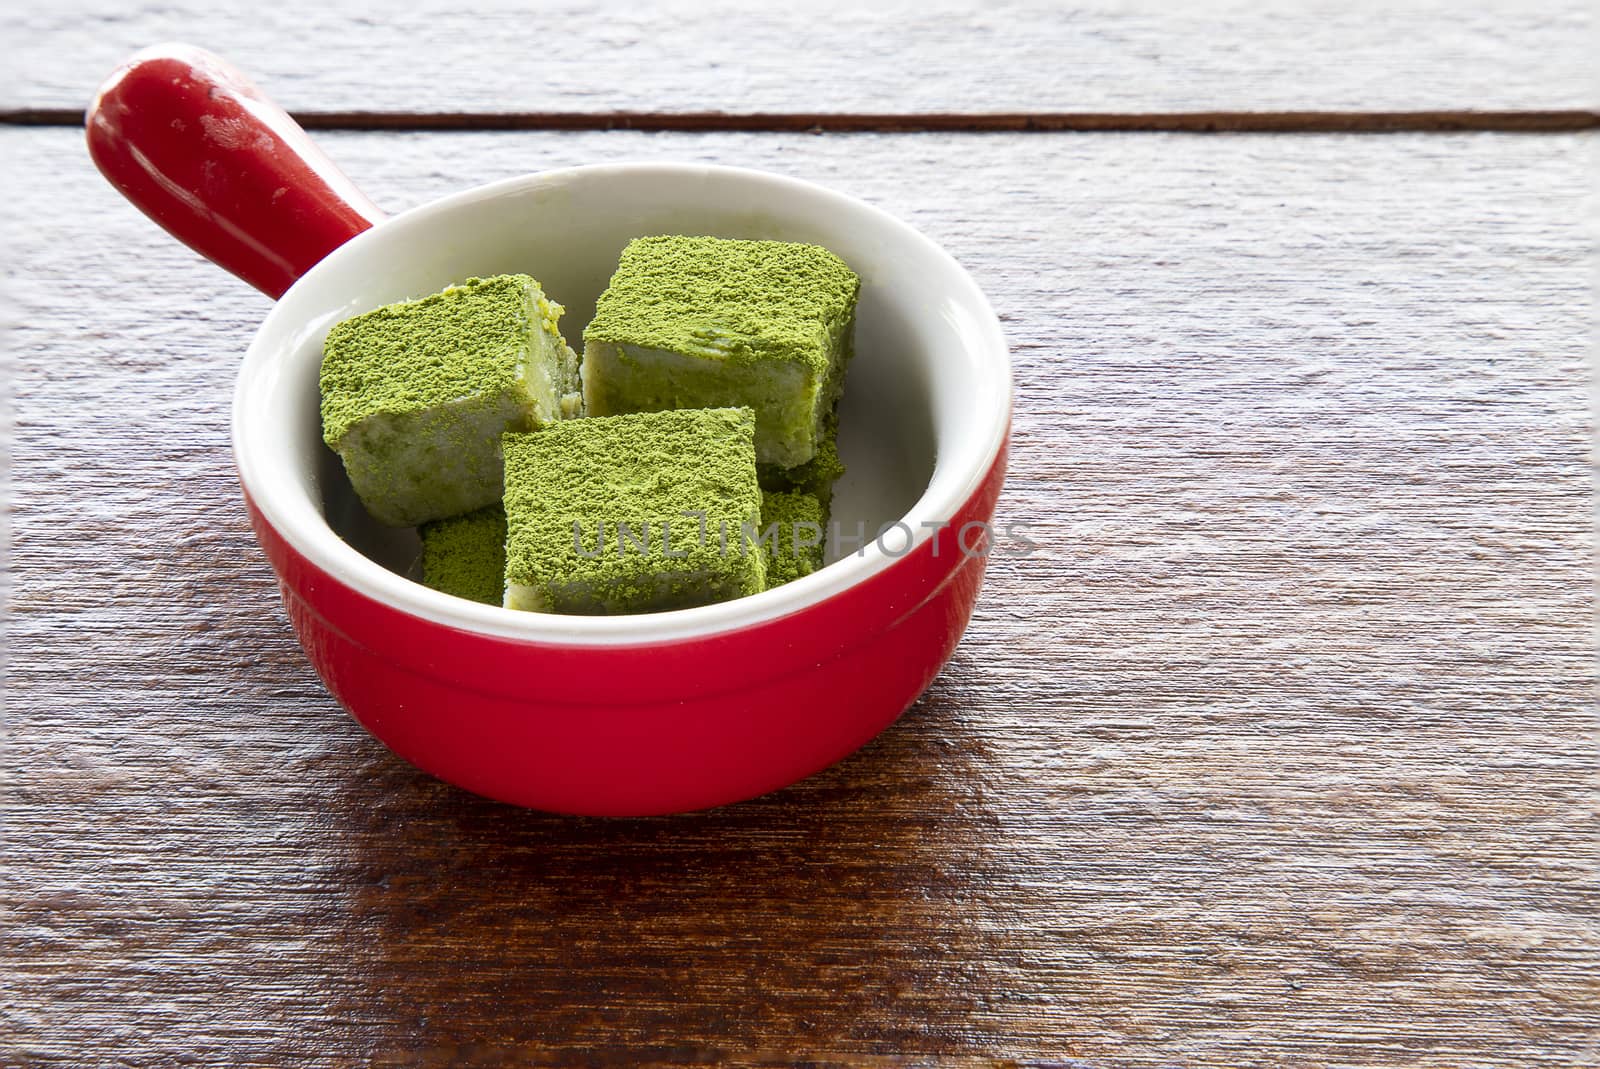 White chocolate fudge cubes heavily coated with fine green tea powder in a red ceramic dish. Brown wooden background.